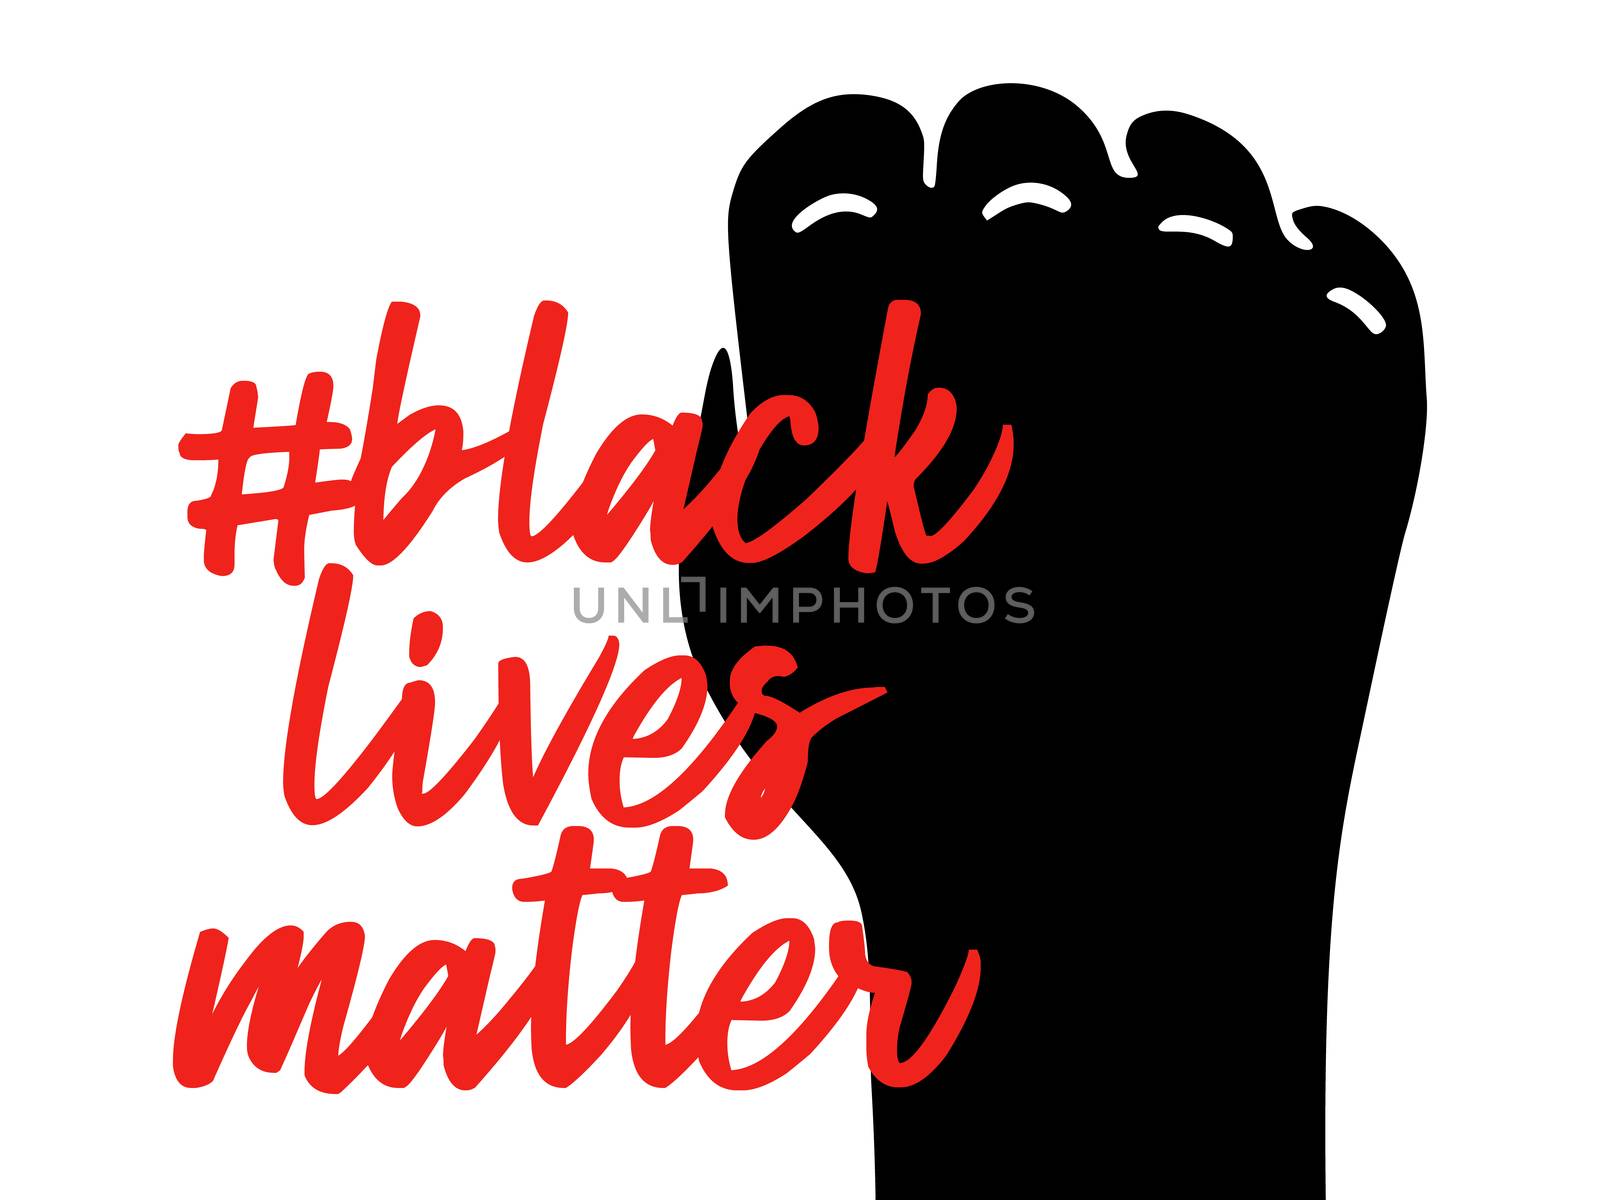 I can't breathe slogan Black lives matter. Black clenched protest fist with barbed wire and bullet holes. Illustration, vector